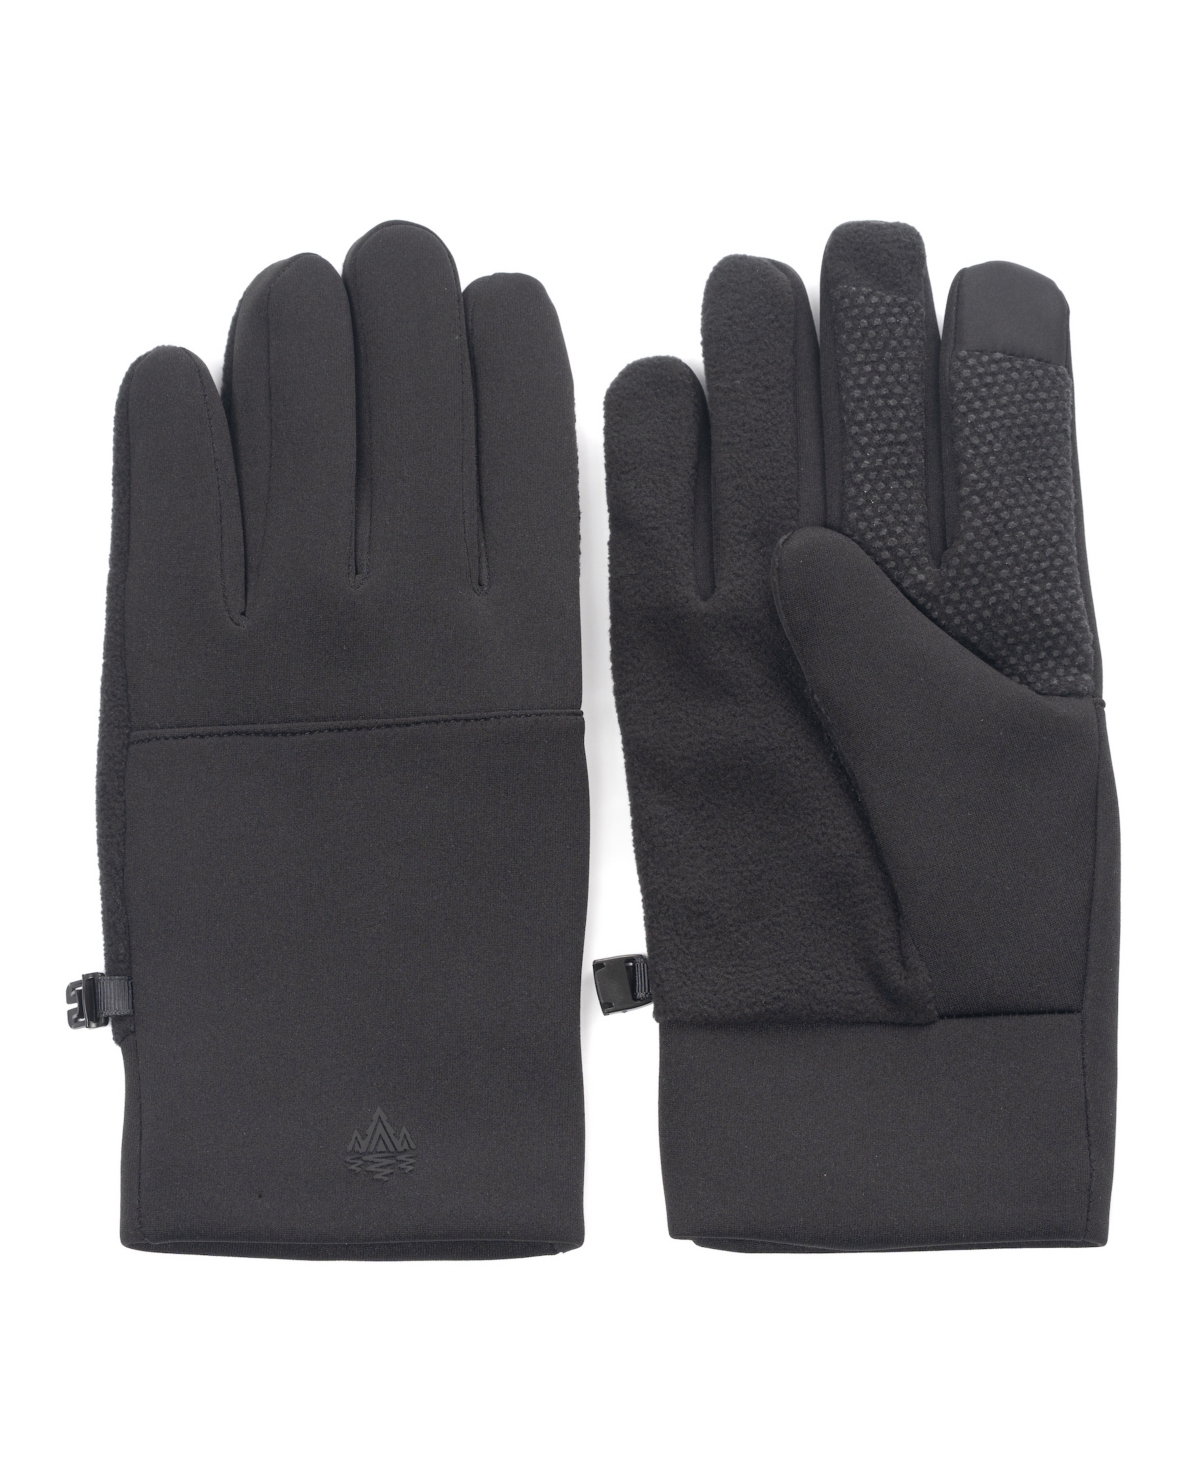 Rainforest Men's Performance Outdoor Glove With Piping In Black